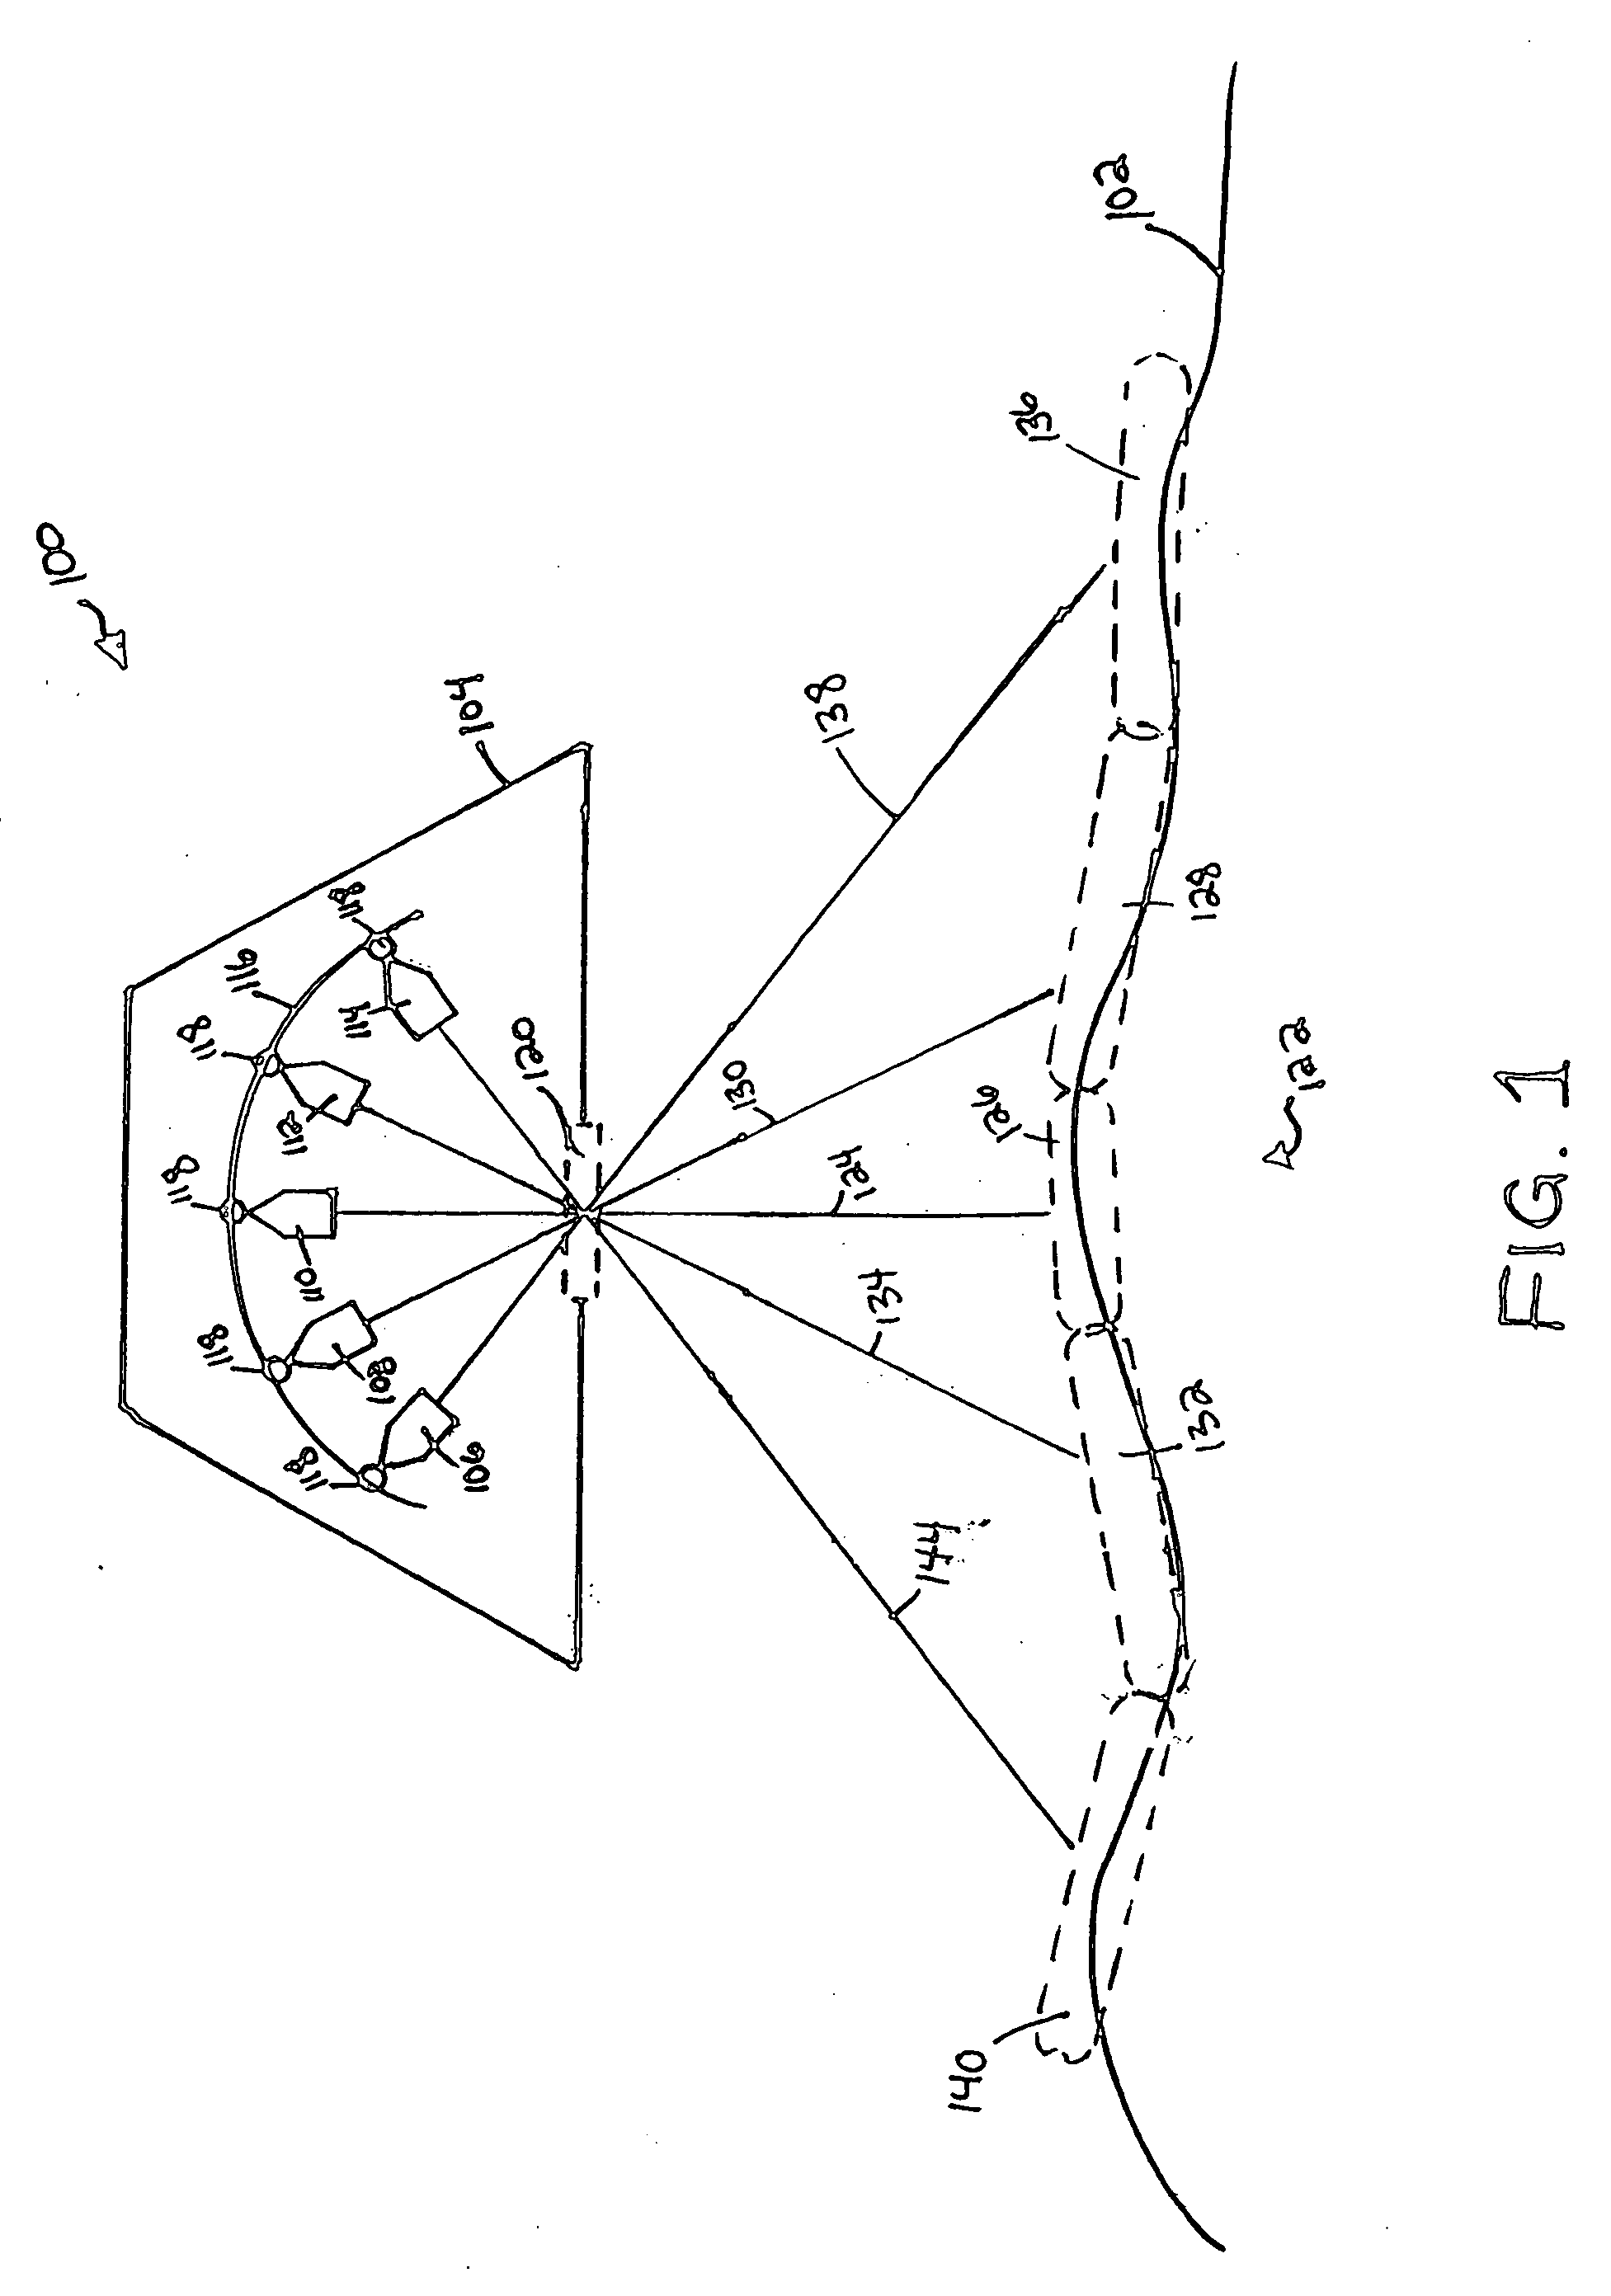 System and method for mosaicing digital ortho-images